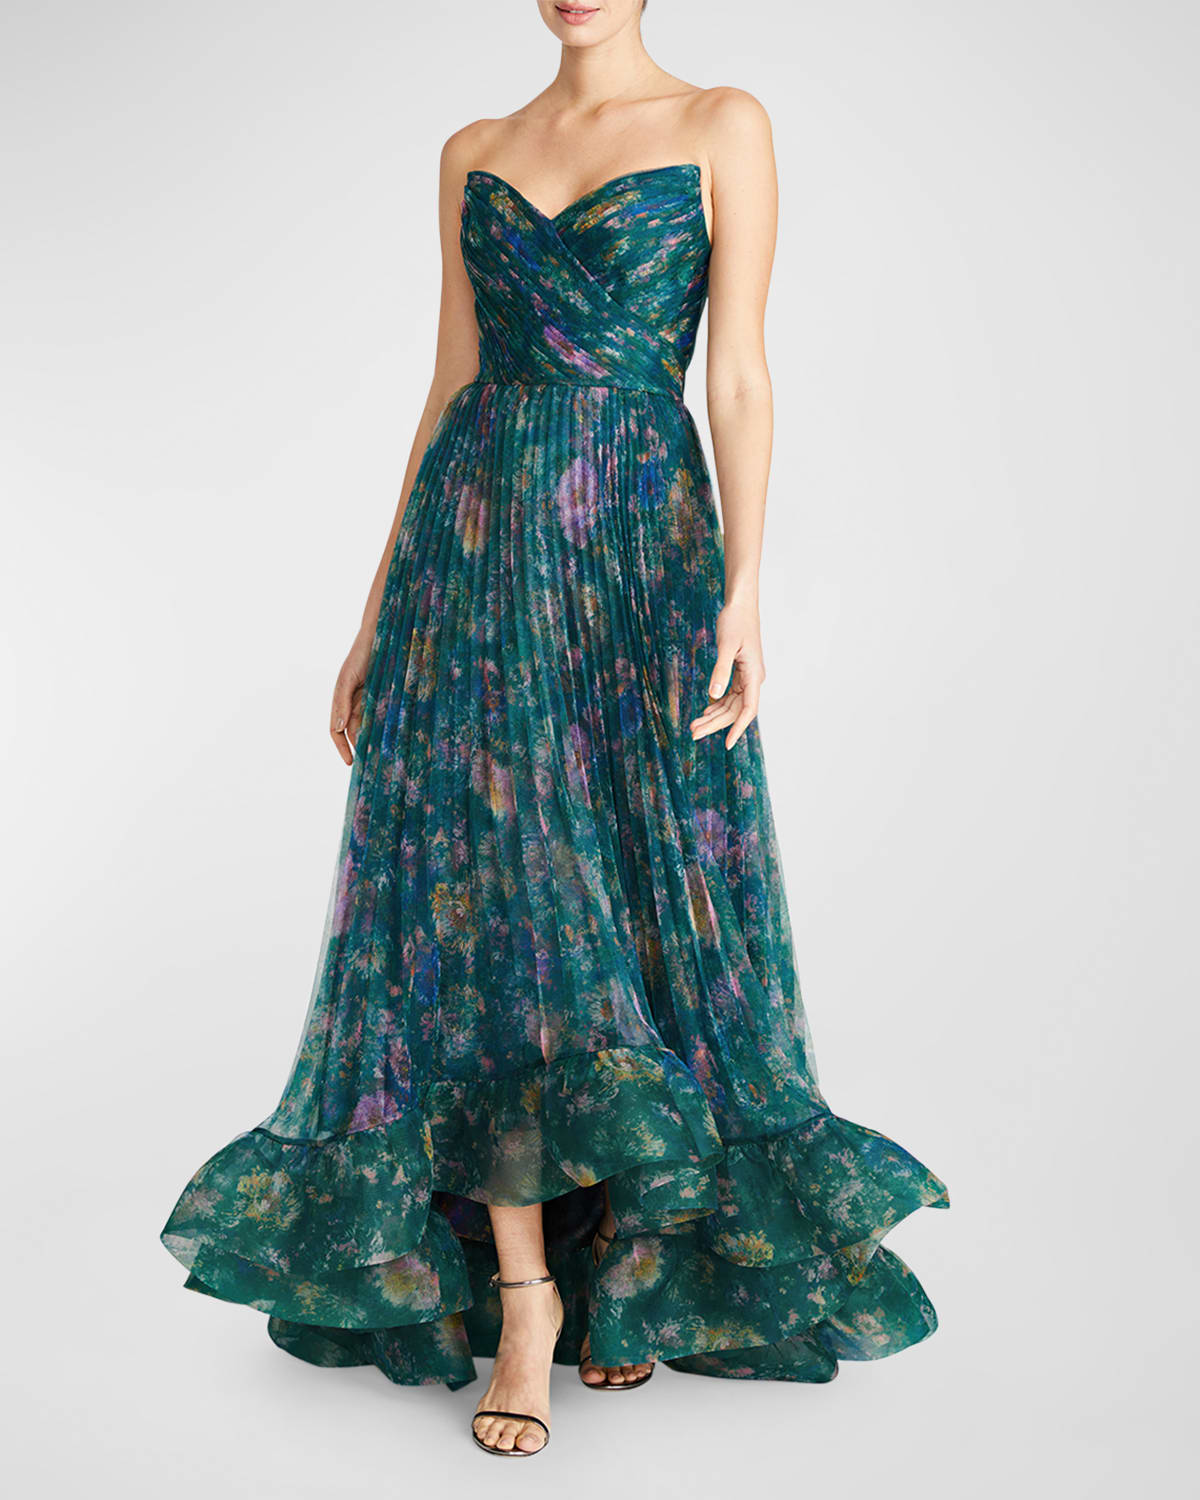 Moira Strapless Pleated Ruffle Gown